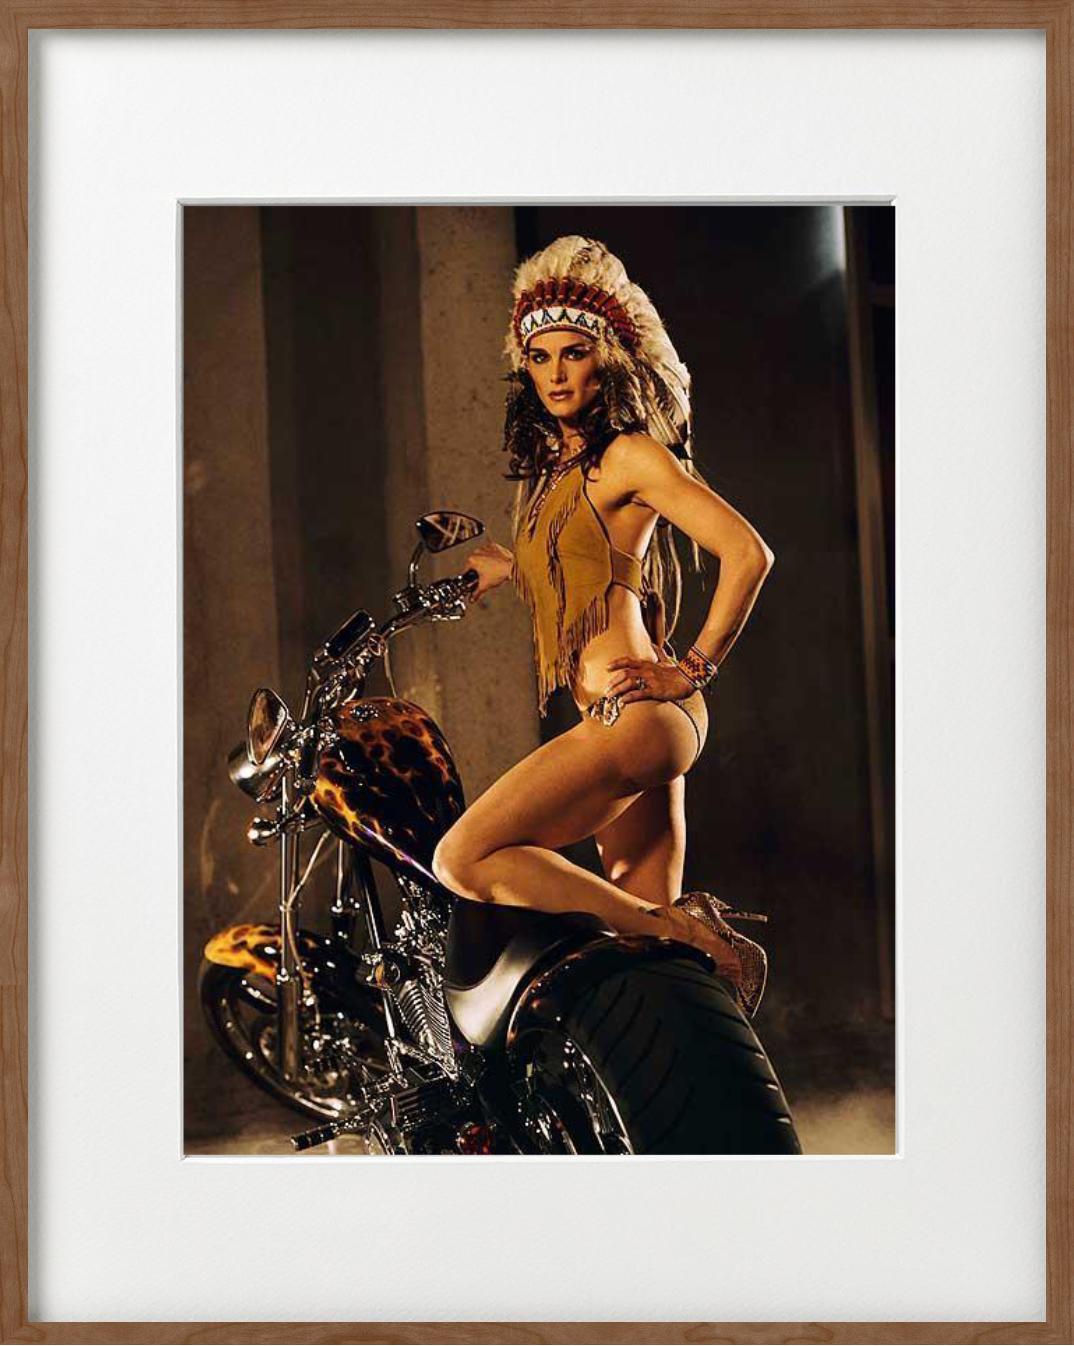 'Brooke Shields, LA' - native look with motorcycle, fine art photography, 2005 - Contemporary Photograph by Sante D´ Orazio